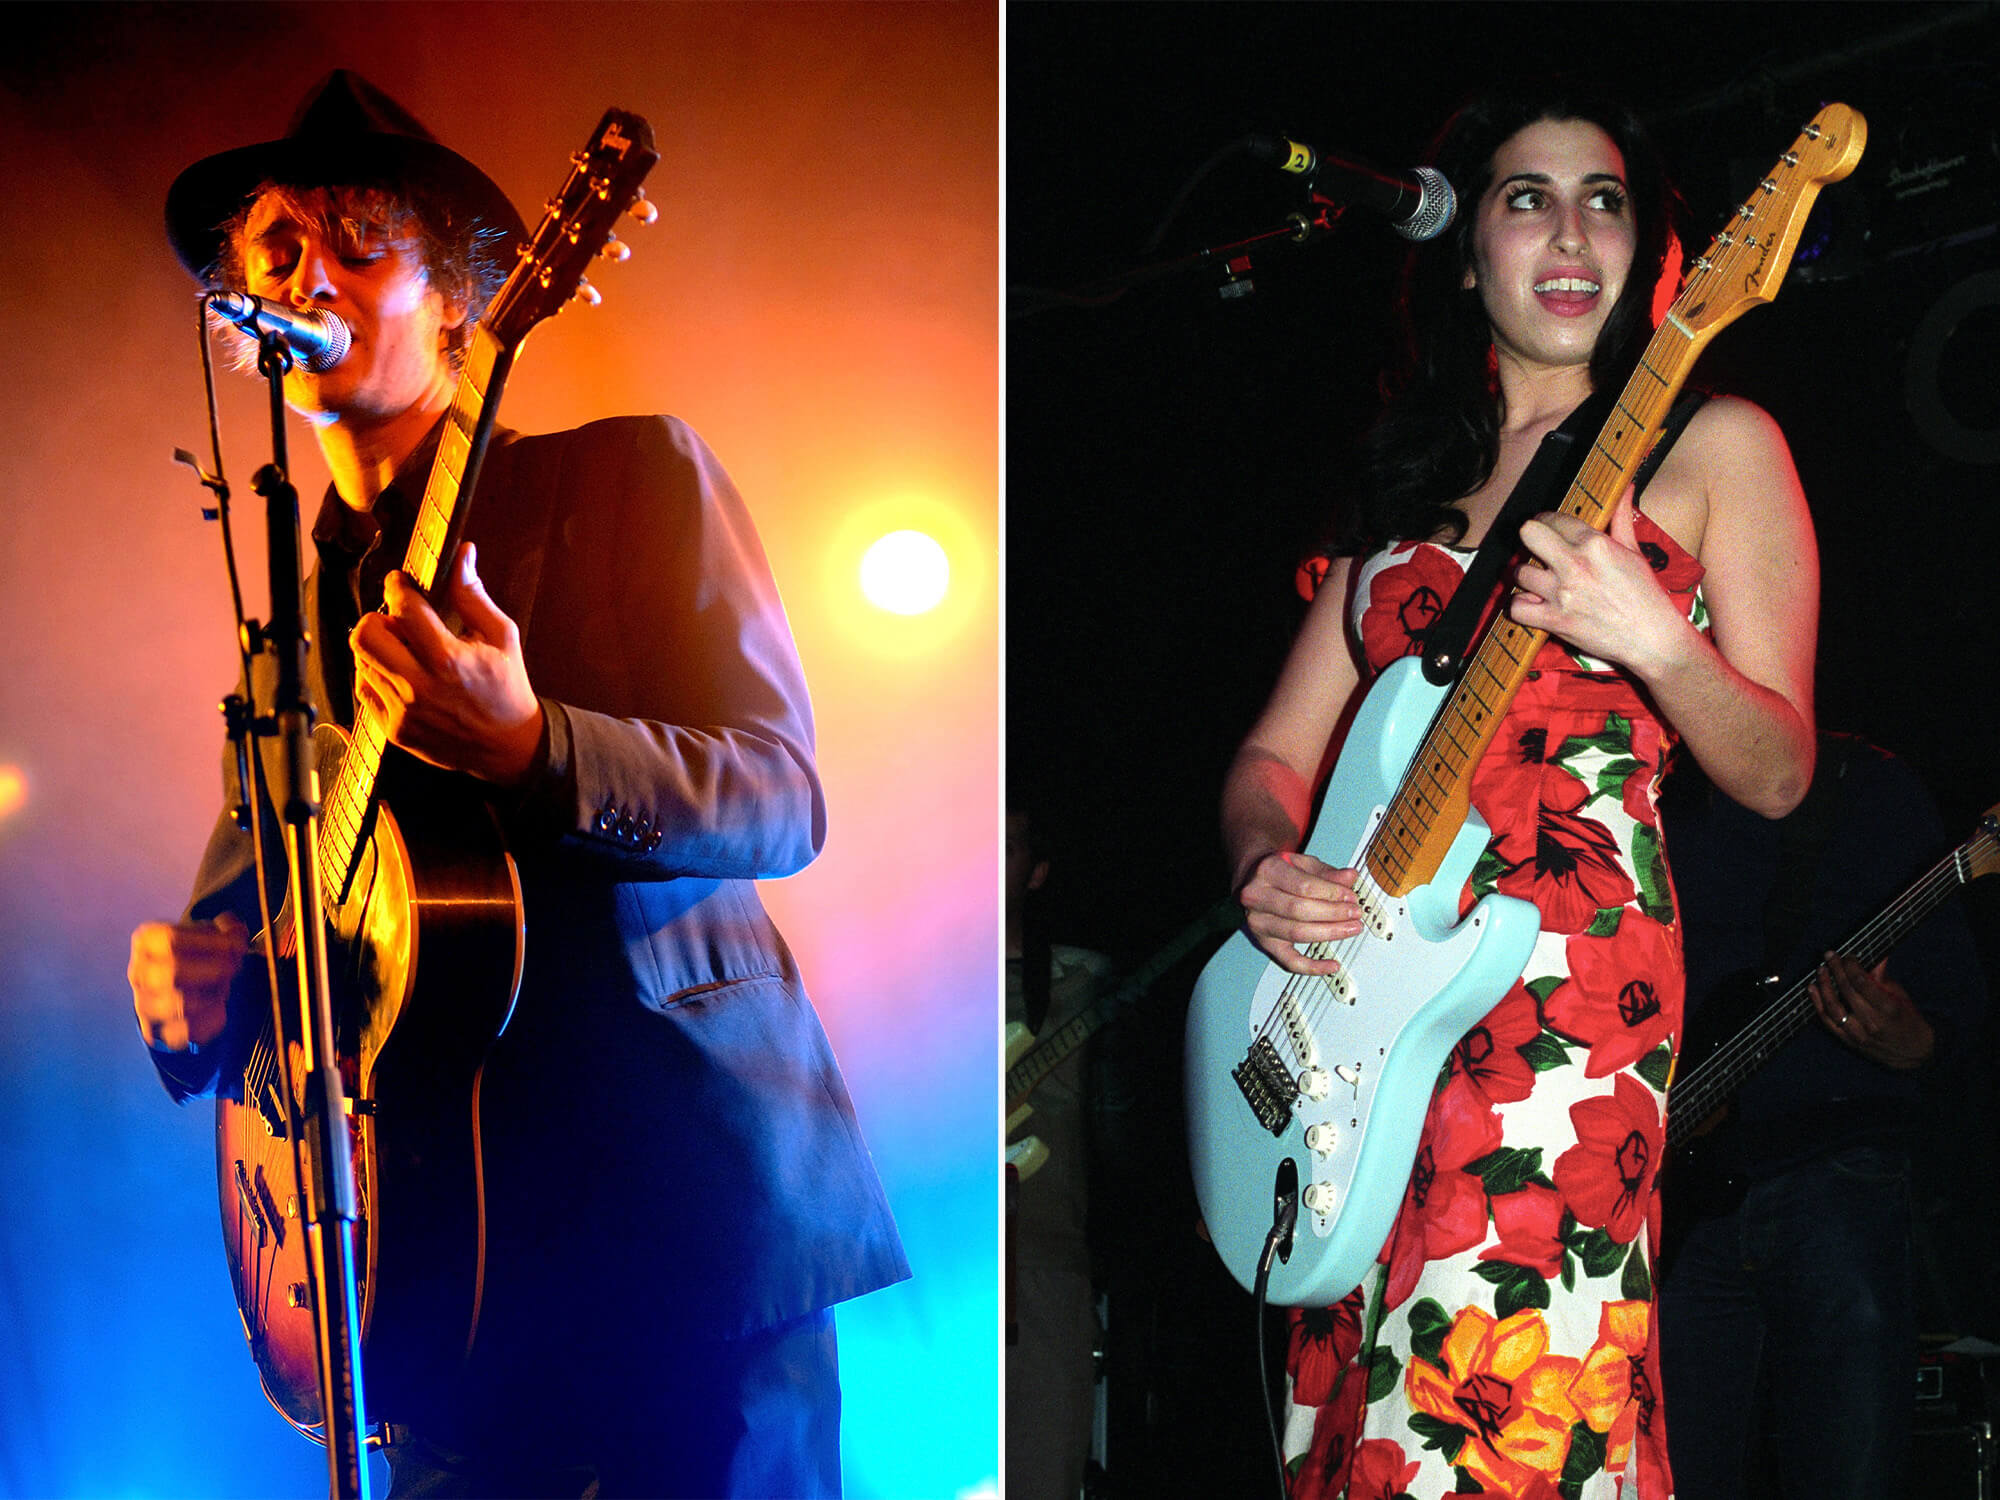 Pete Doherty (left) on stage playing acoustic guitar. Amy Winehouse (right) playing a Strat.